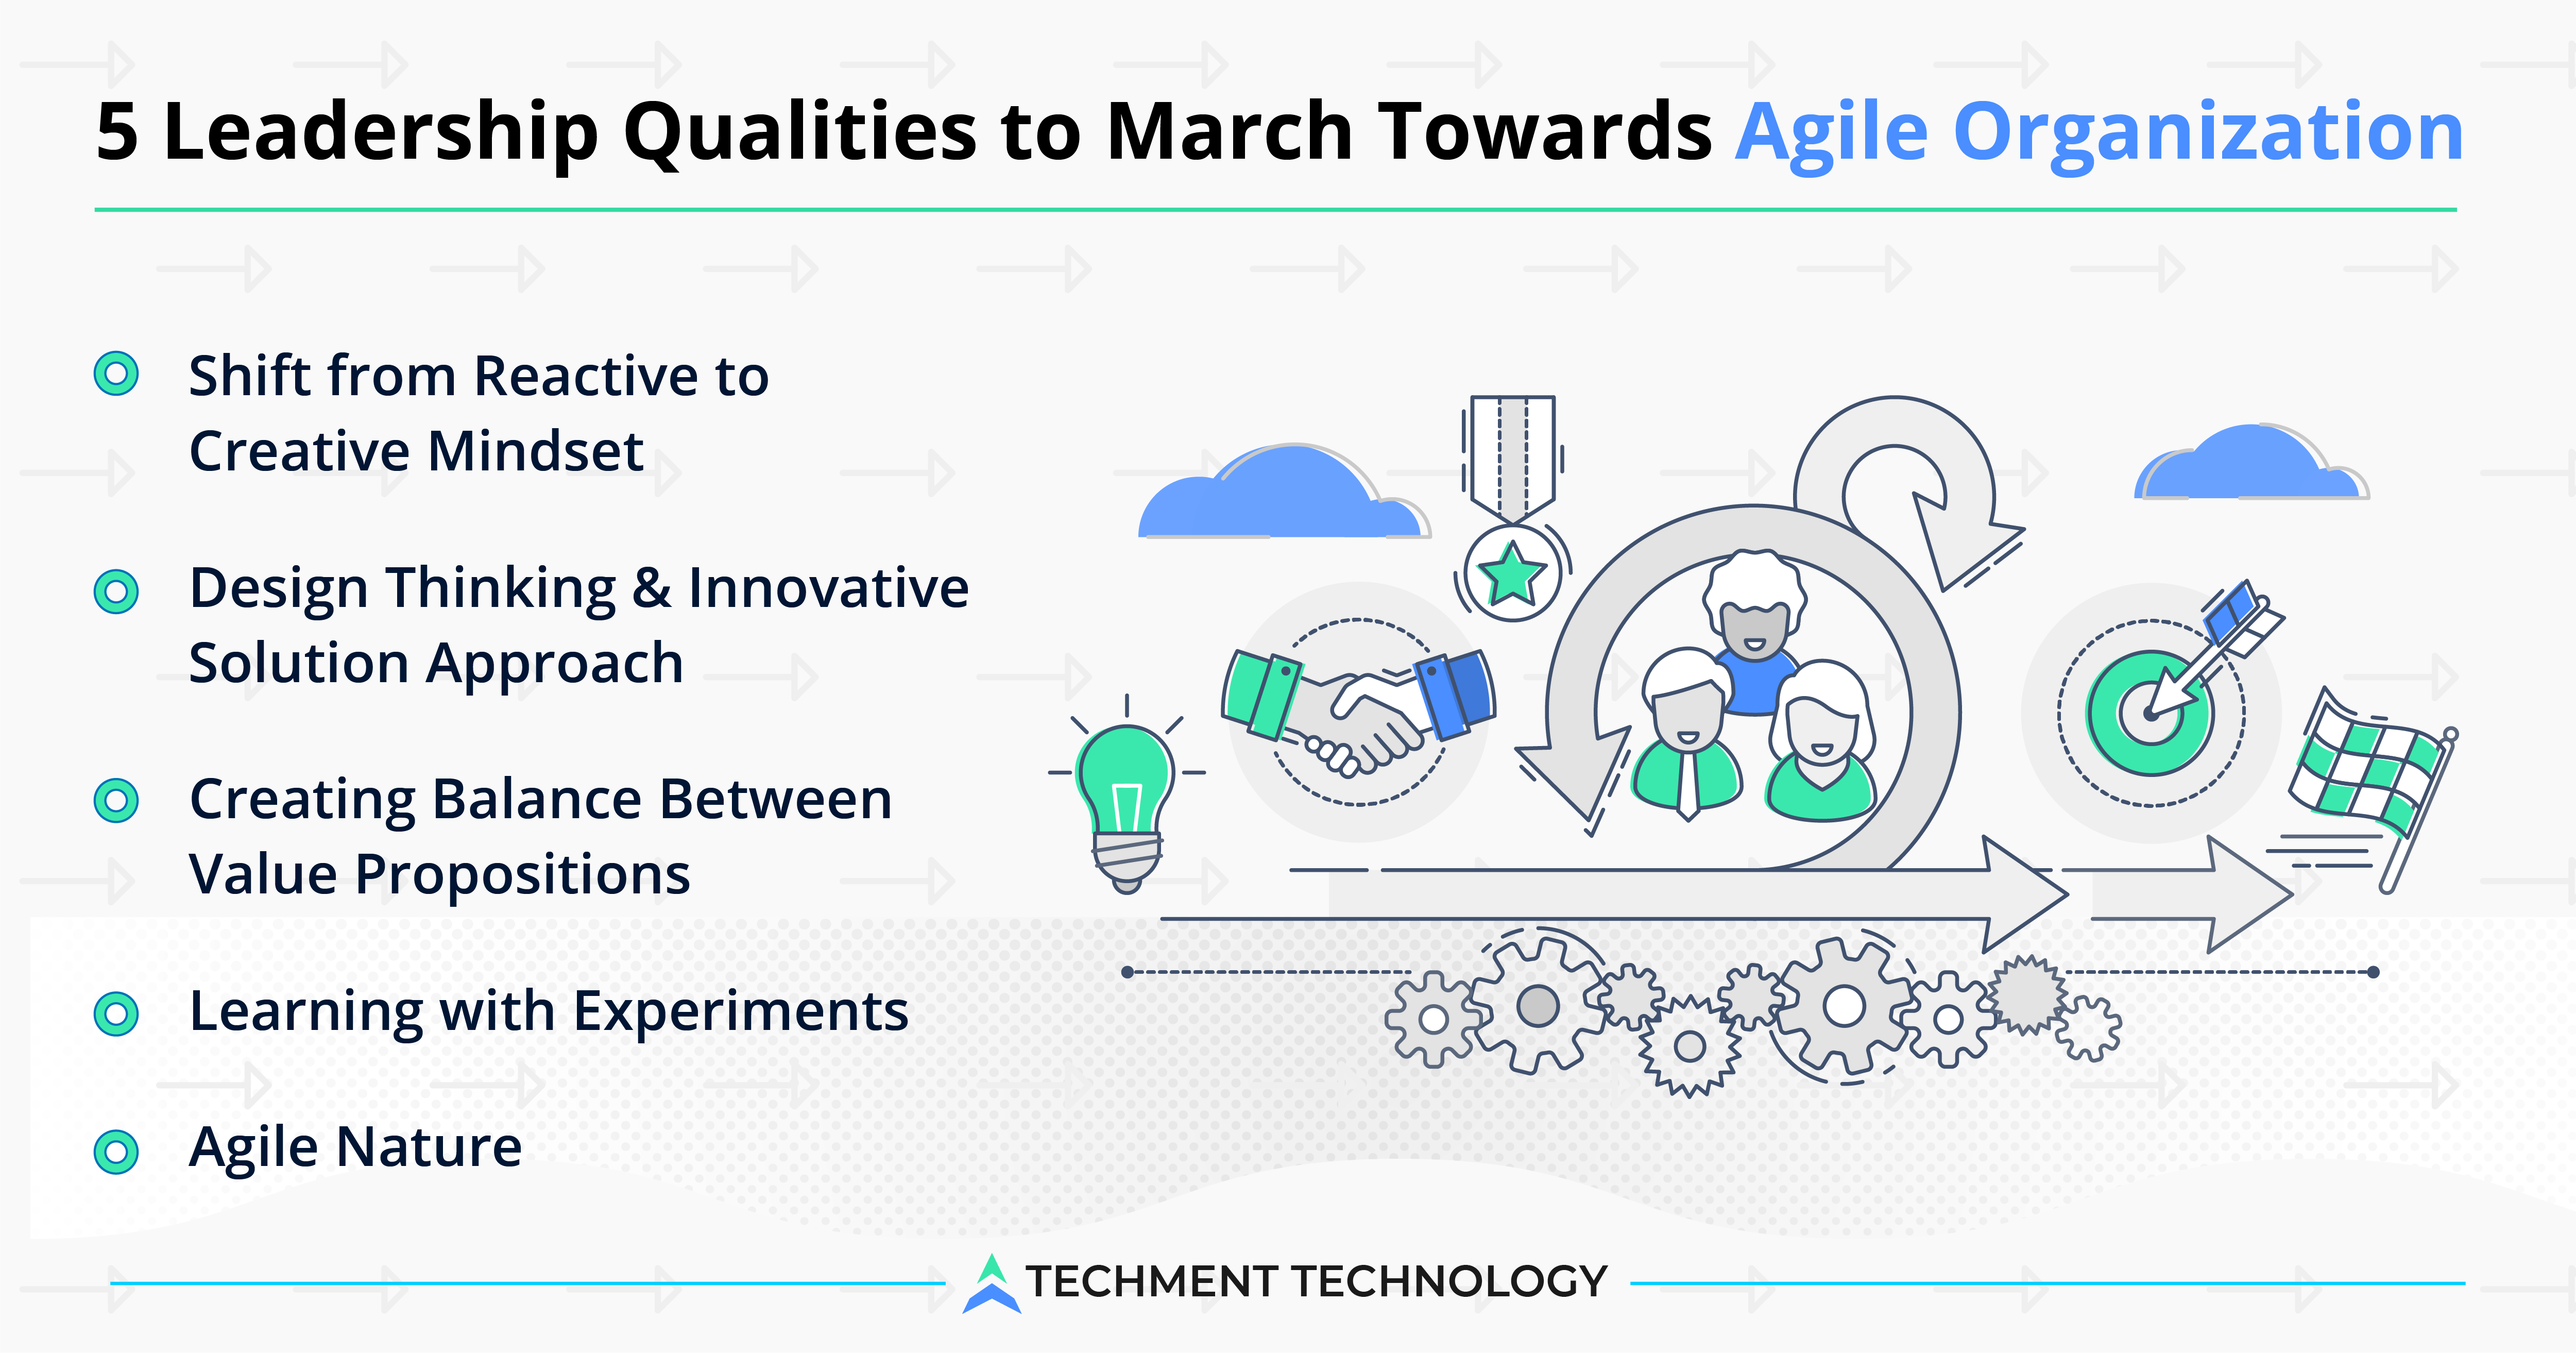 5 Leadership Qualities to March Towards Agile Organization